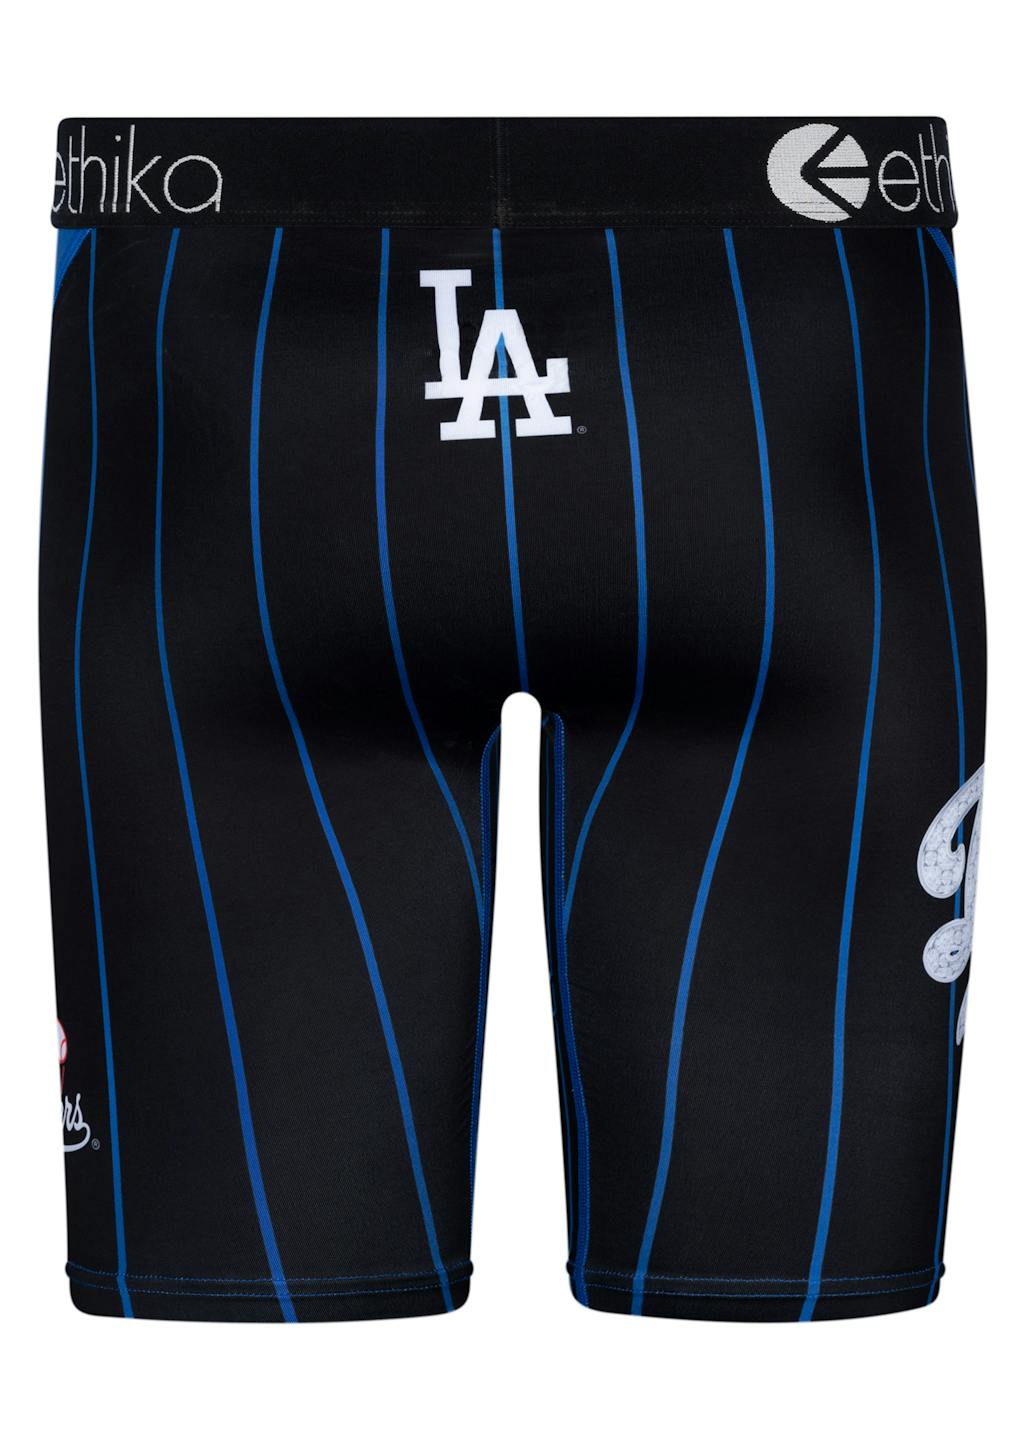 Los Angeles Dodgers | Ethika | With You Everywhere